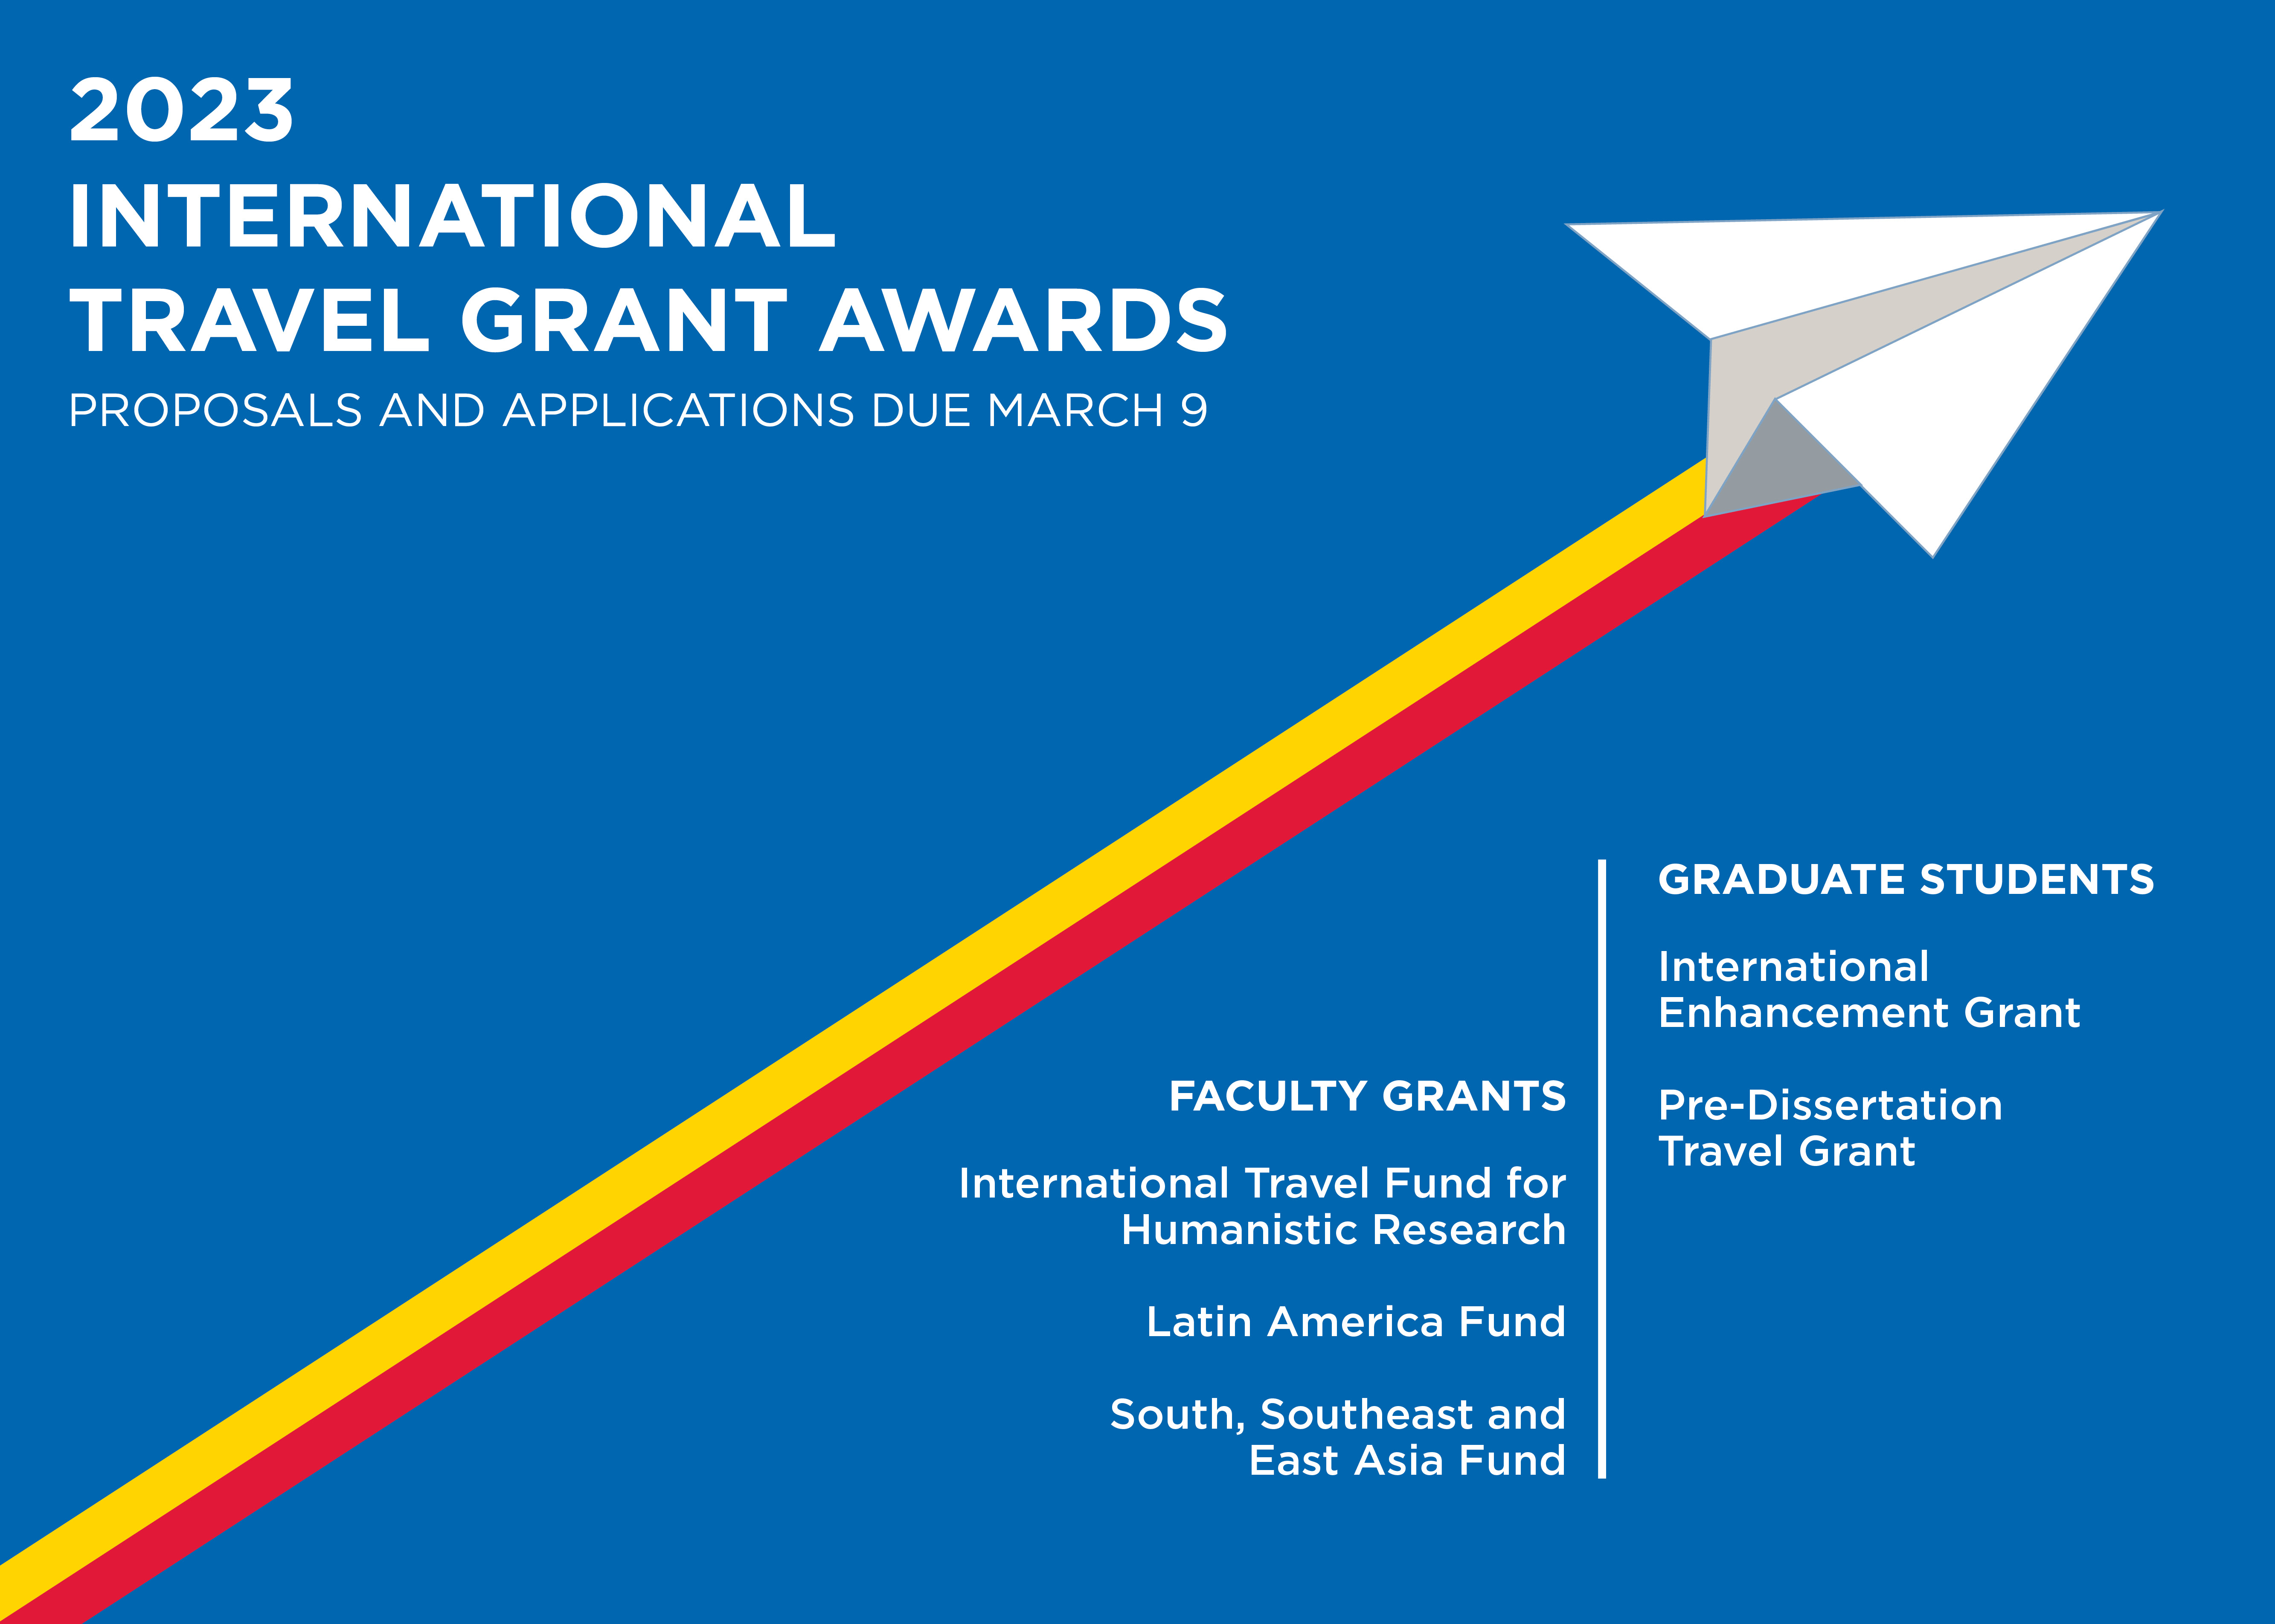 Image: Paper airplane on blue background. Text: 2023 International Travel Grants Due March 9